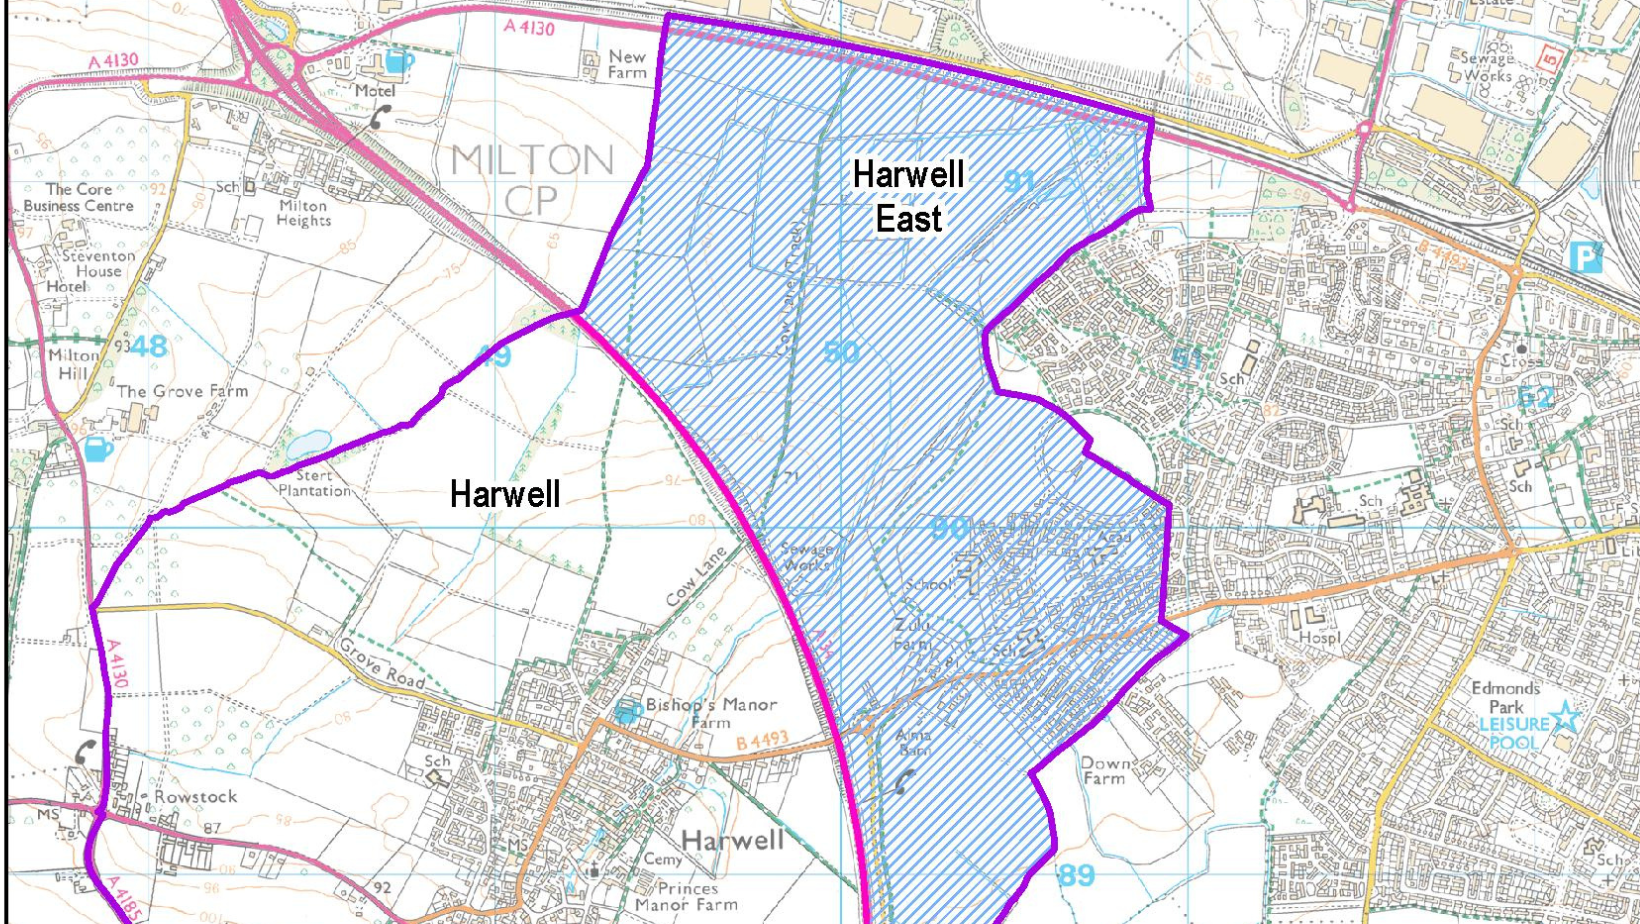 An Ordnance Survey Map of the area for the proposed Harwell East parish in relation to the existing Harwell parish. The new parish is shown as a shaded area to the north-east of Harwell village, including Valley Park and the section of Great Western Park that’s in the Vale of White Horse.